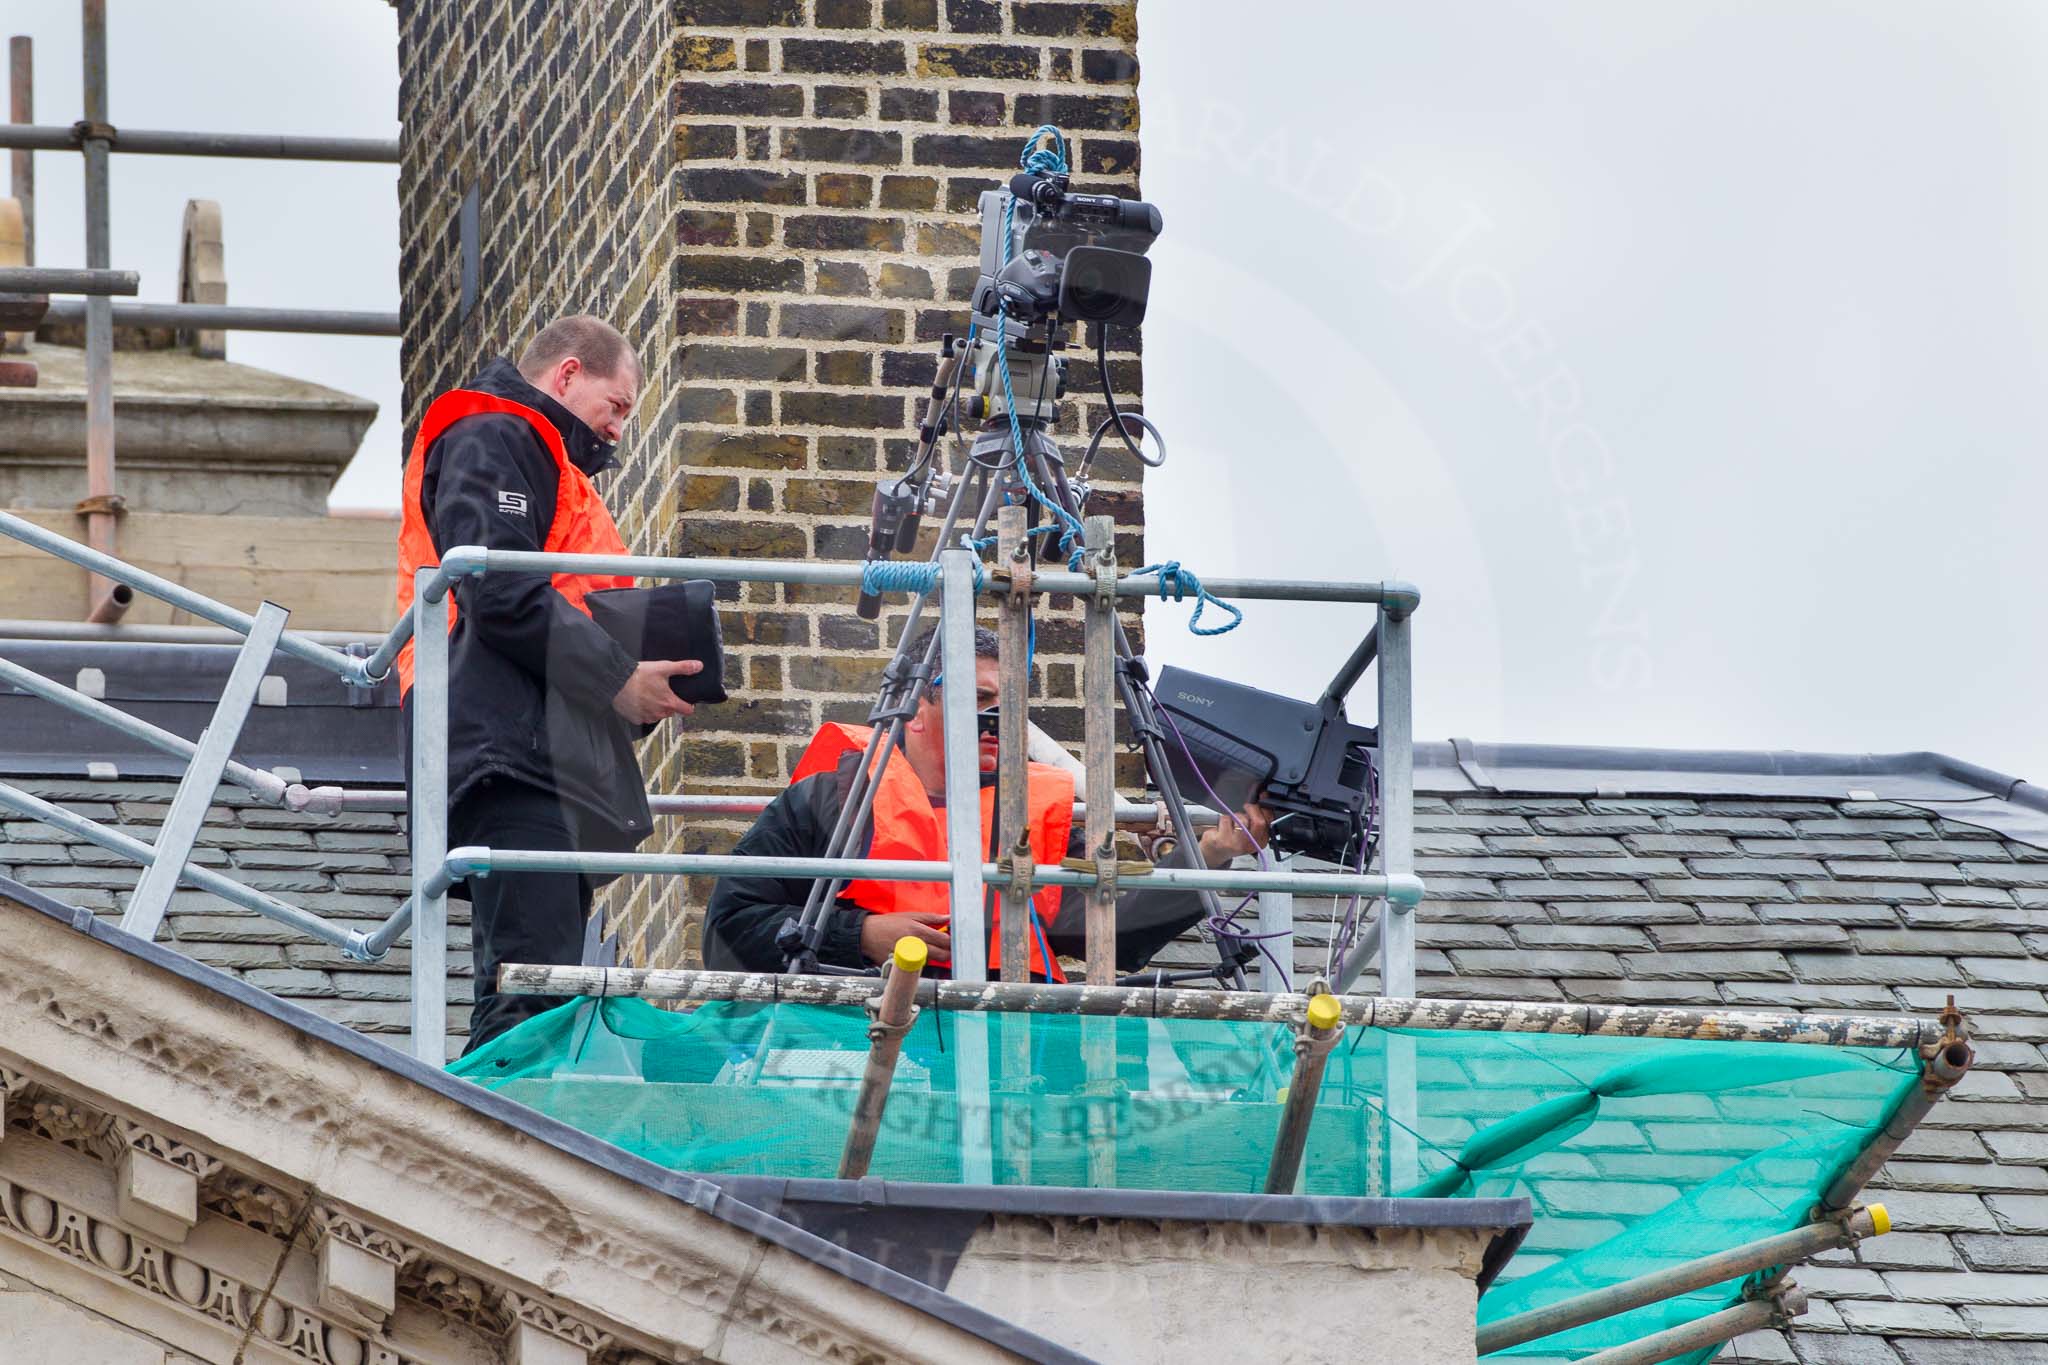 Major General's Review 2013: A BBC/SIS camera next to the chimney on the roof of the Cabinet Office..
Horse Guards Parade, Westminster,
London SW1,

United Kingdom,
on 01 June 2013 at 09:46, image #13